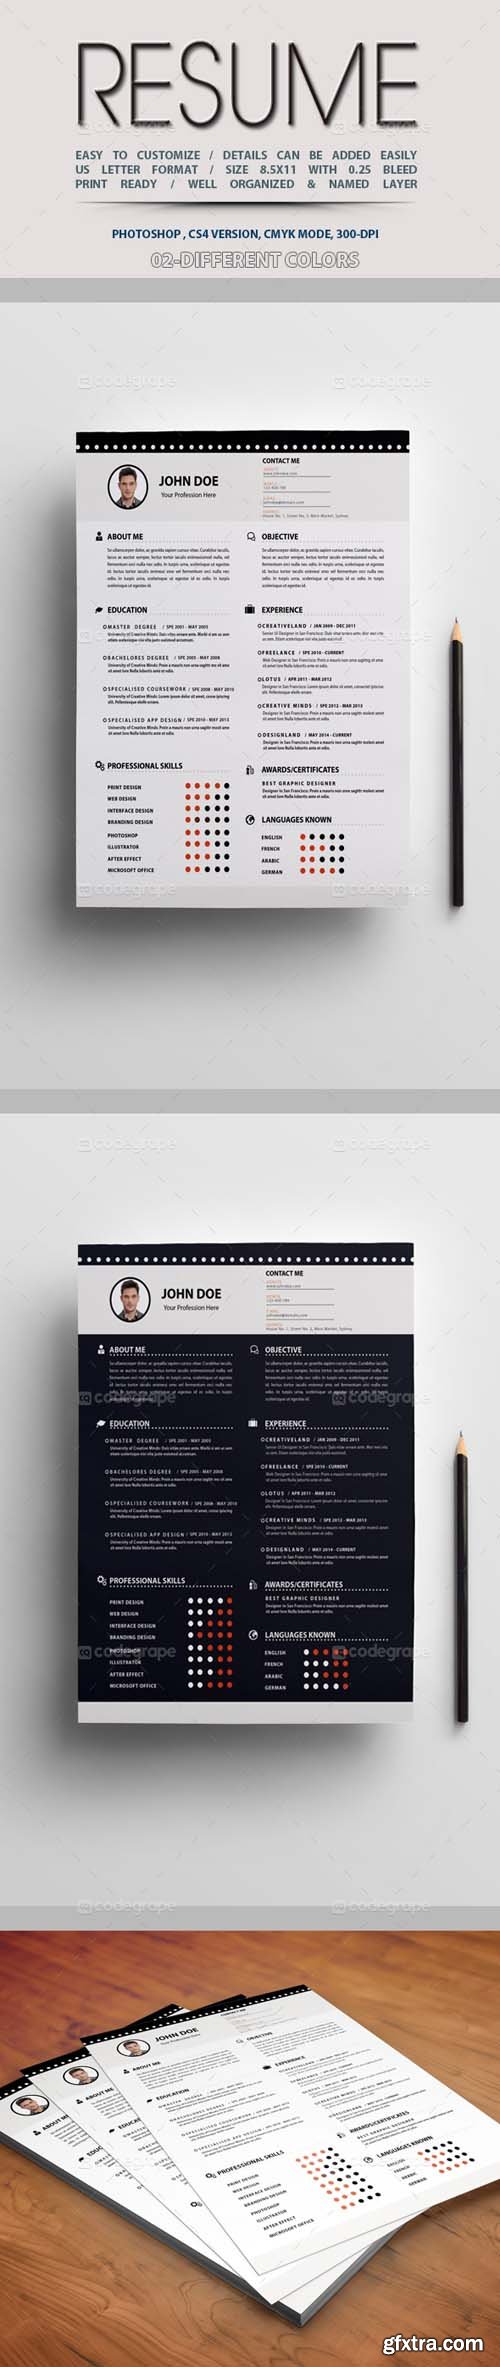 Resume Template 2 Colors 5236